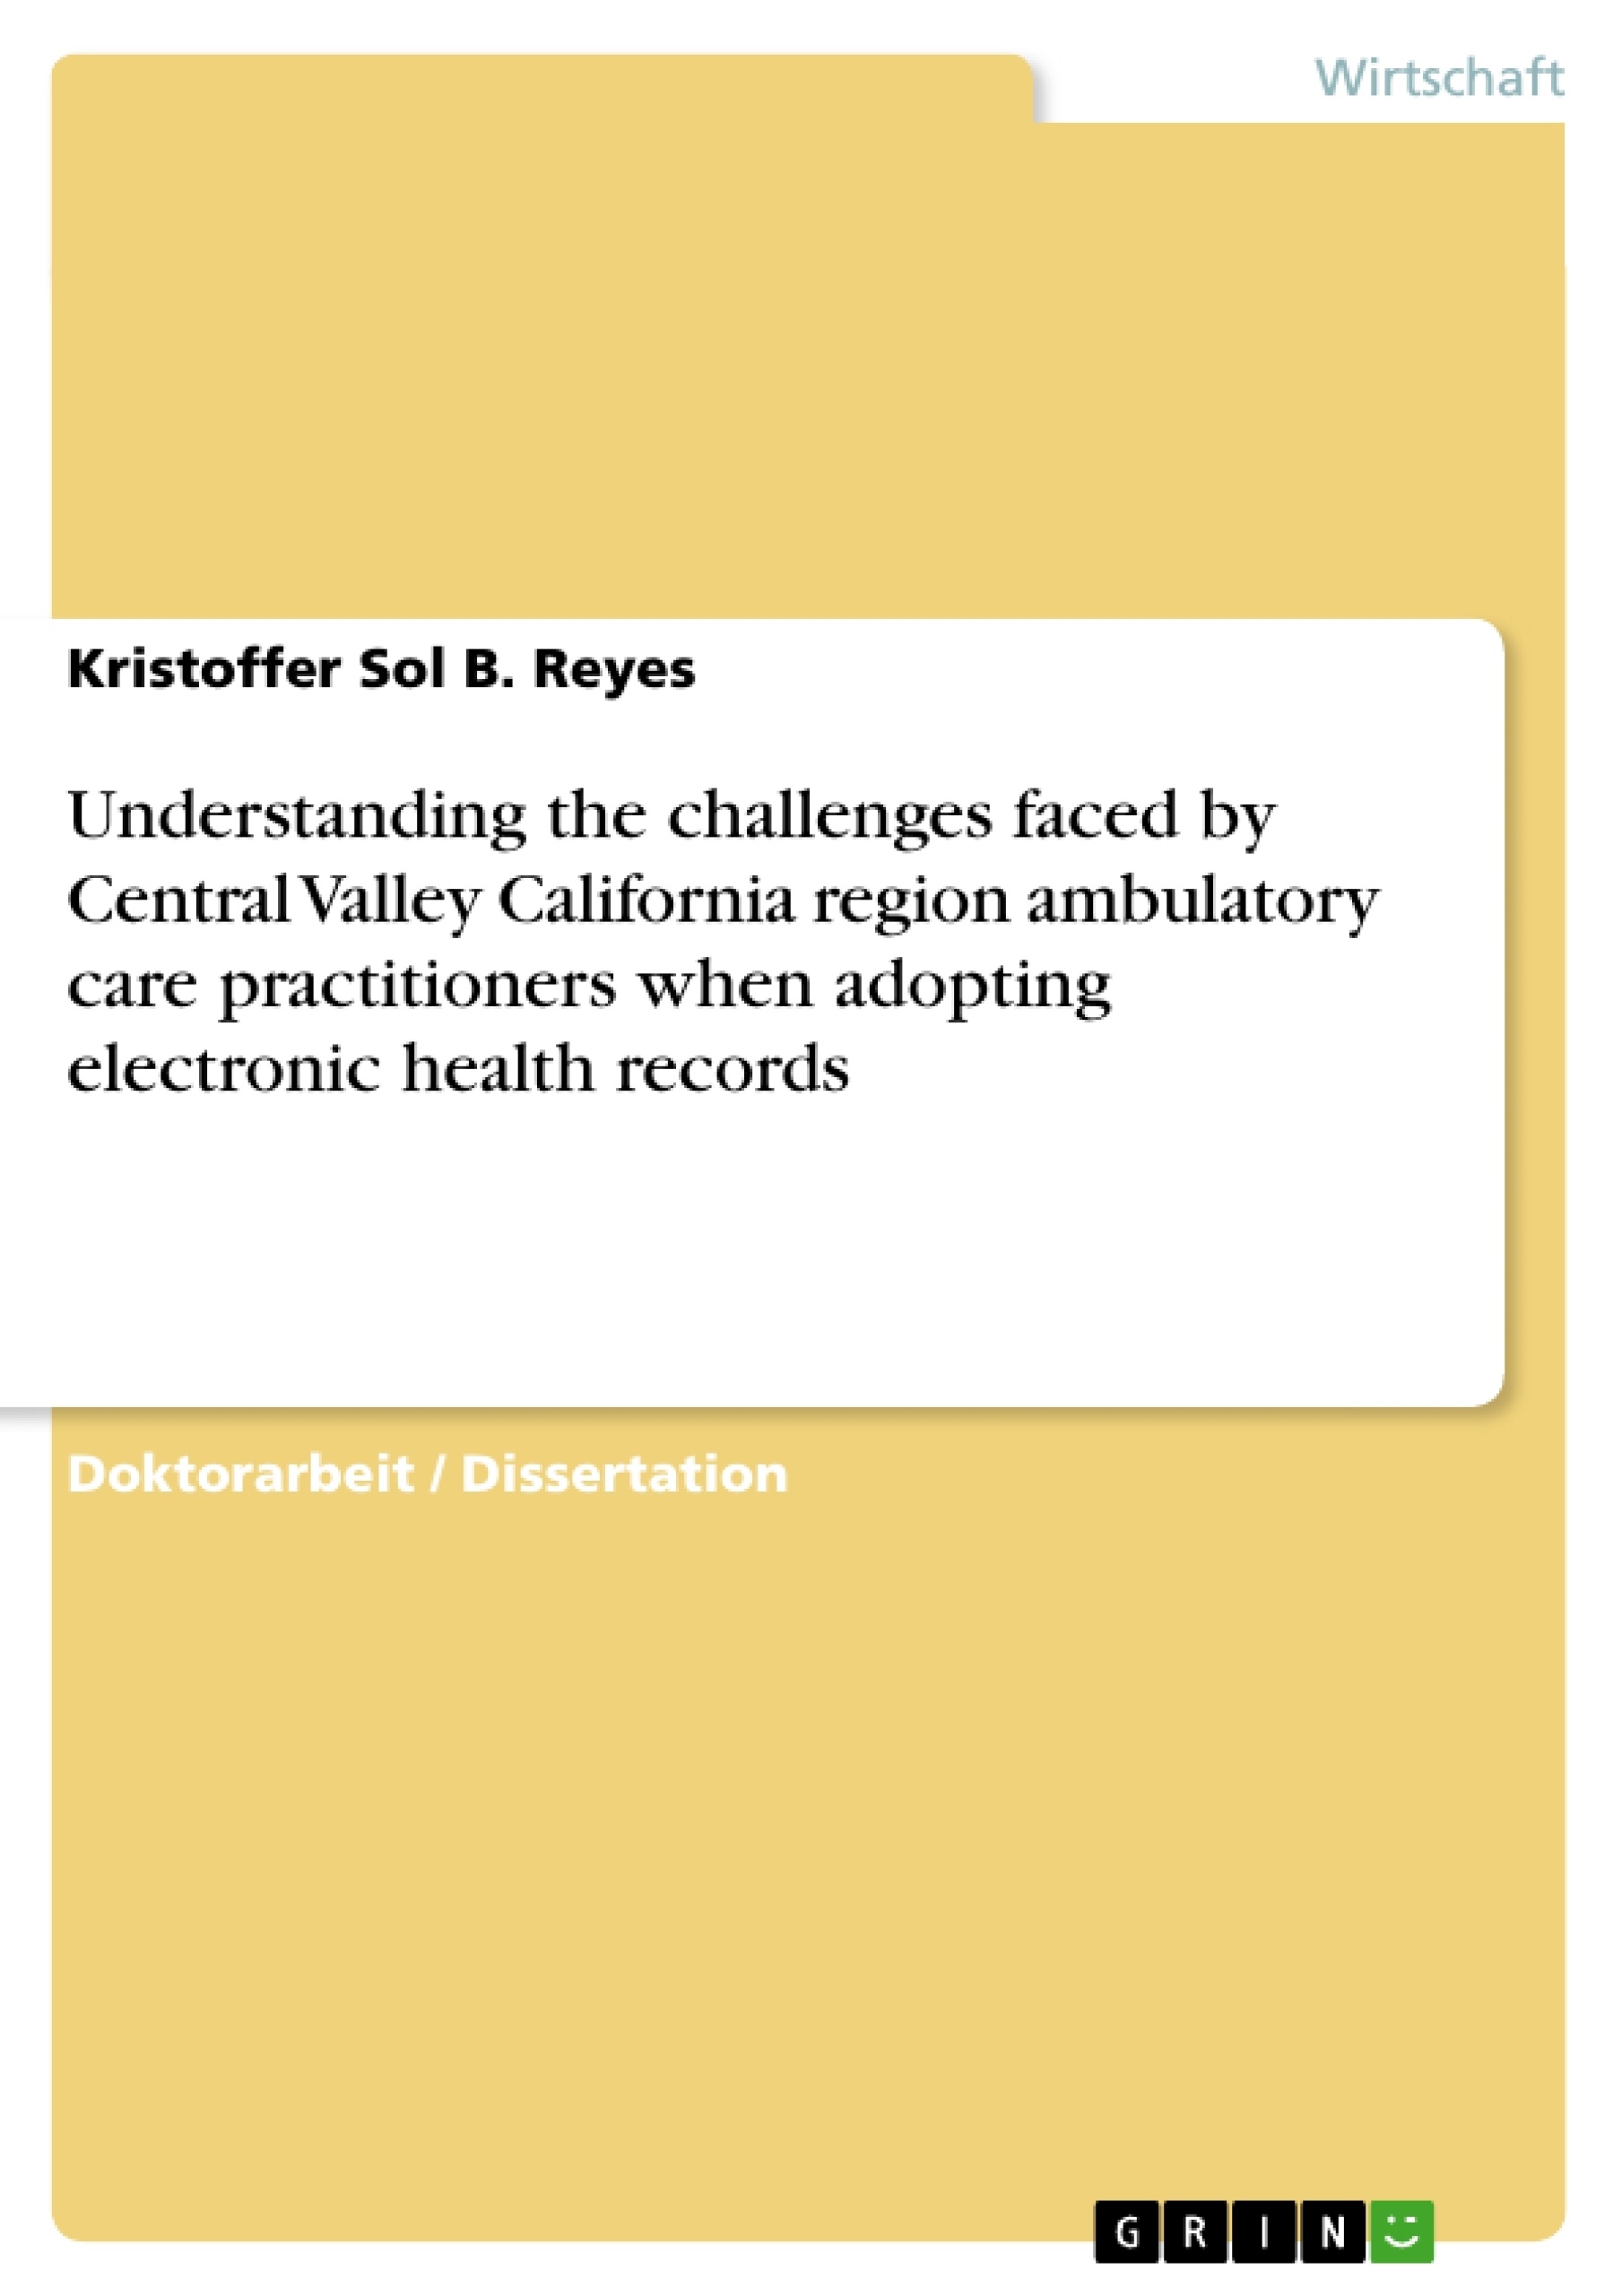 Titel: Understanding the challenges faced by Central Valley California region ambulatory care practitioners when adopting electronic health records